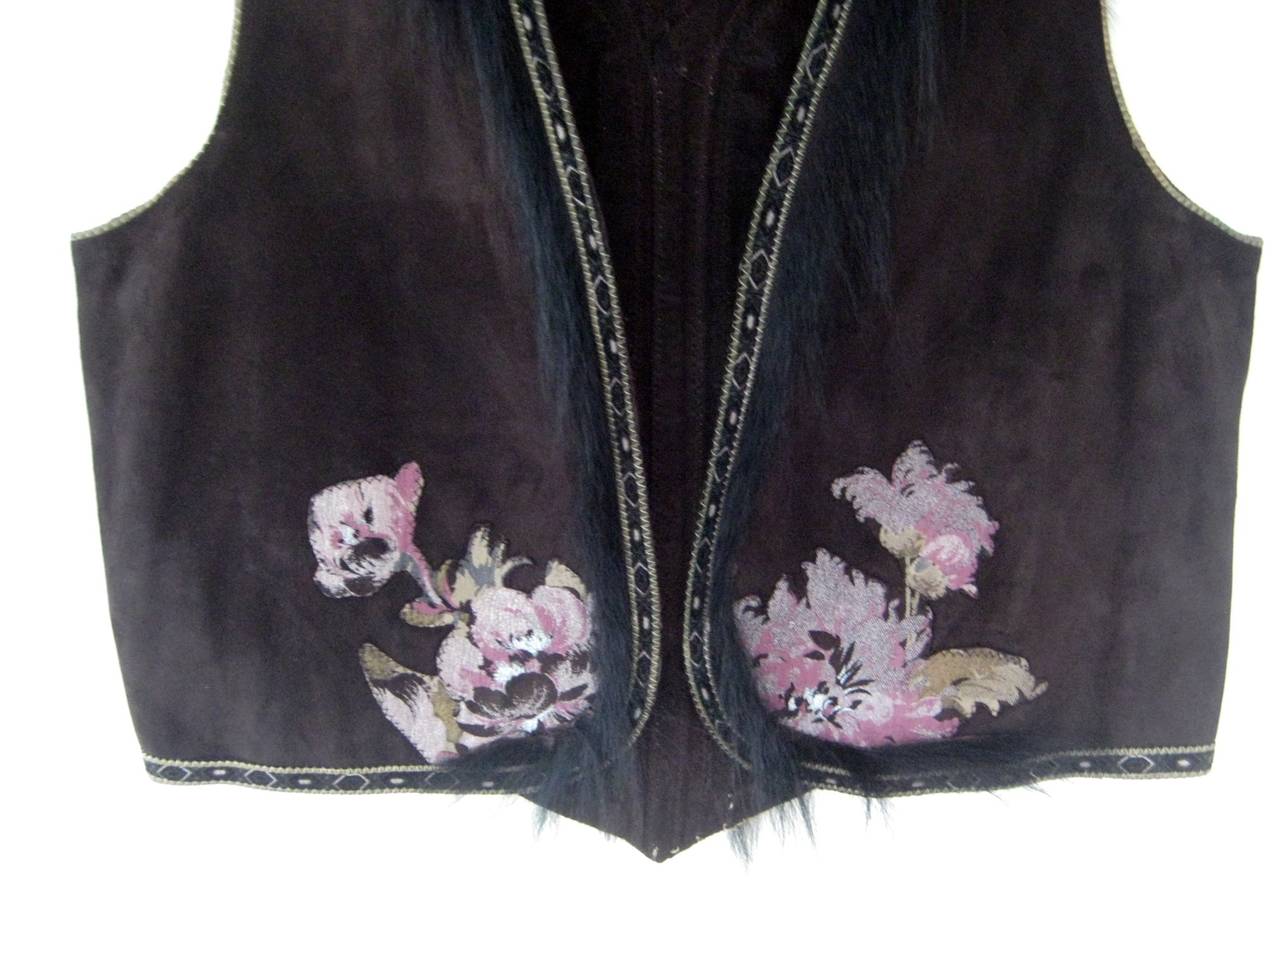 1970s Roberto Cavalli suede vest with pony hair trim , hand painted floral appliqué and snakeskin trim .
From The Ebony Fashion Fair Runway Archive Collection 
No closures
Labeled size medium